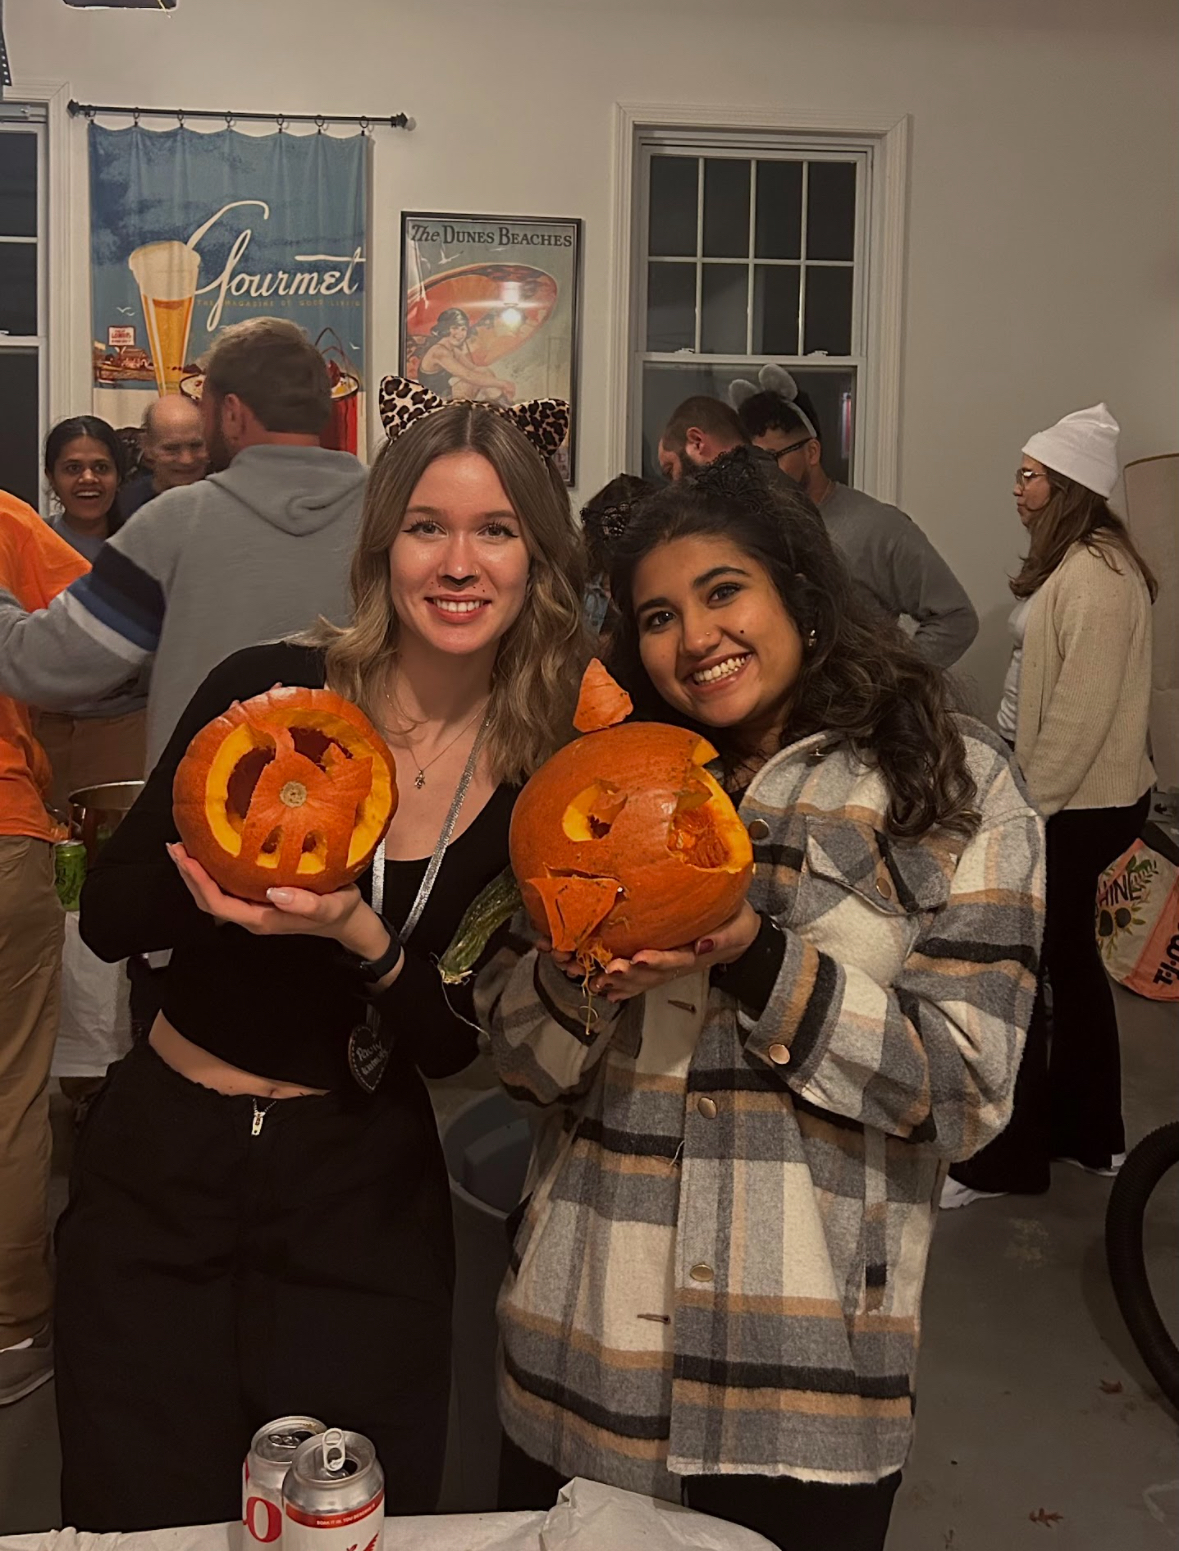 Ingrid and Fariha showing off their great pumpkin carving abilities at the annual pumpkin carving contest at the Goldhamer’s